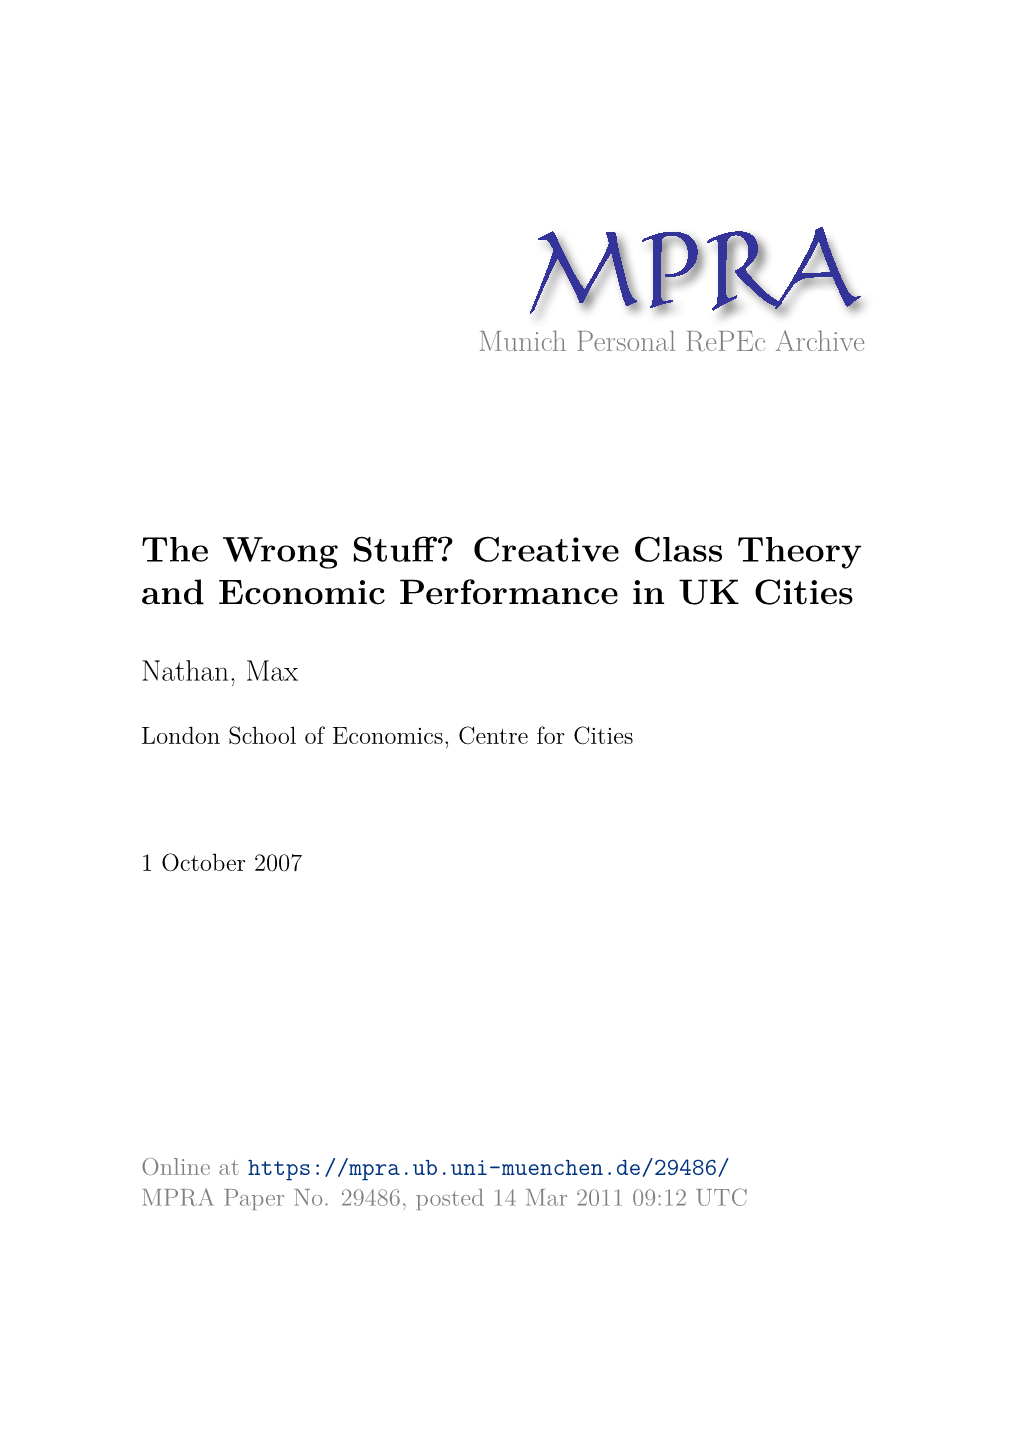 Creative Class Theory and Economic Performance in UK Cities